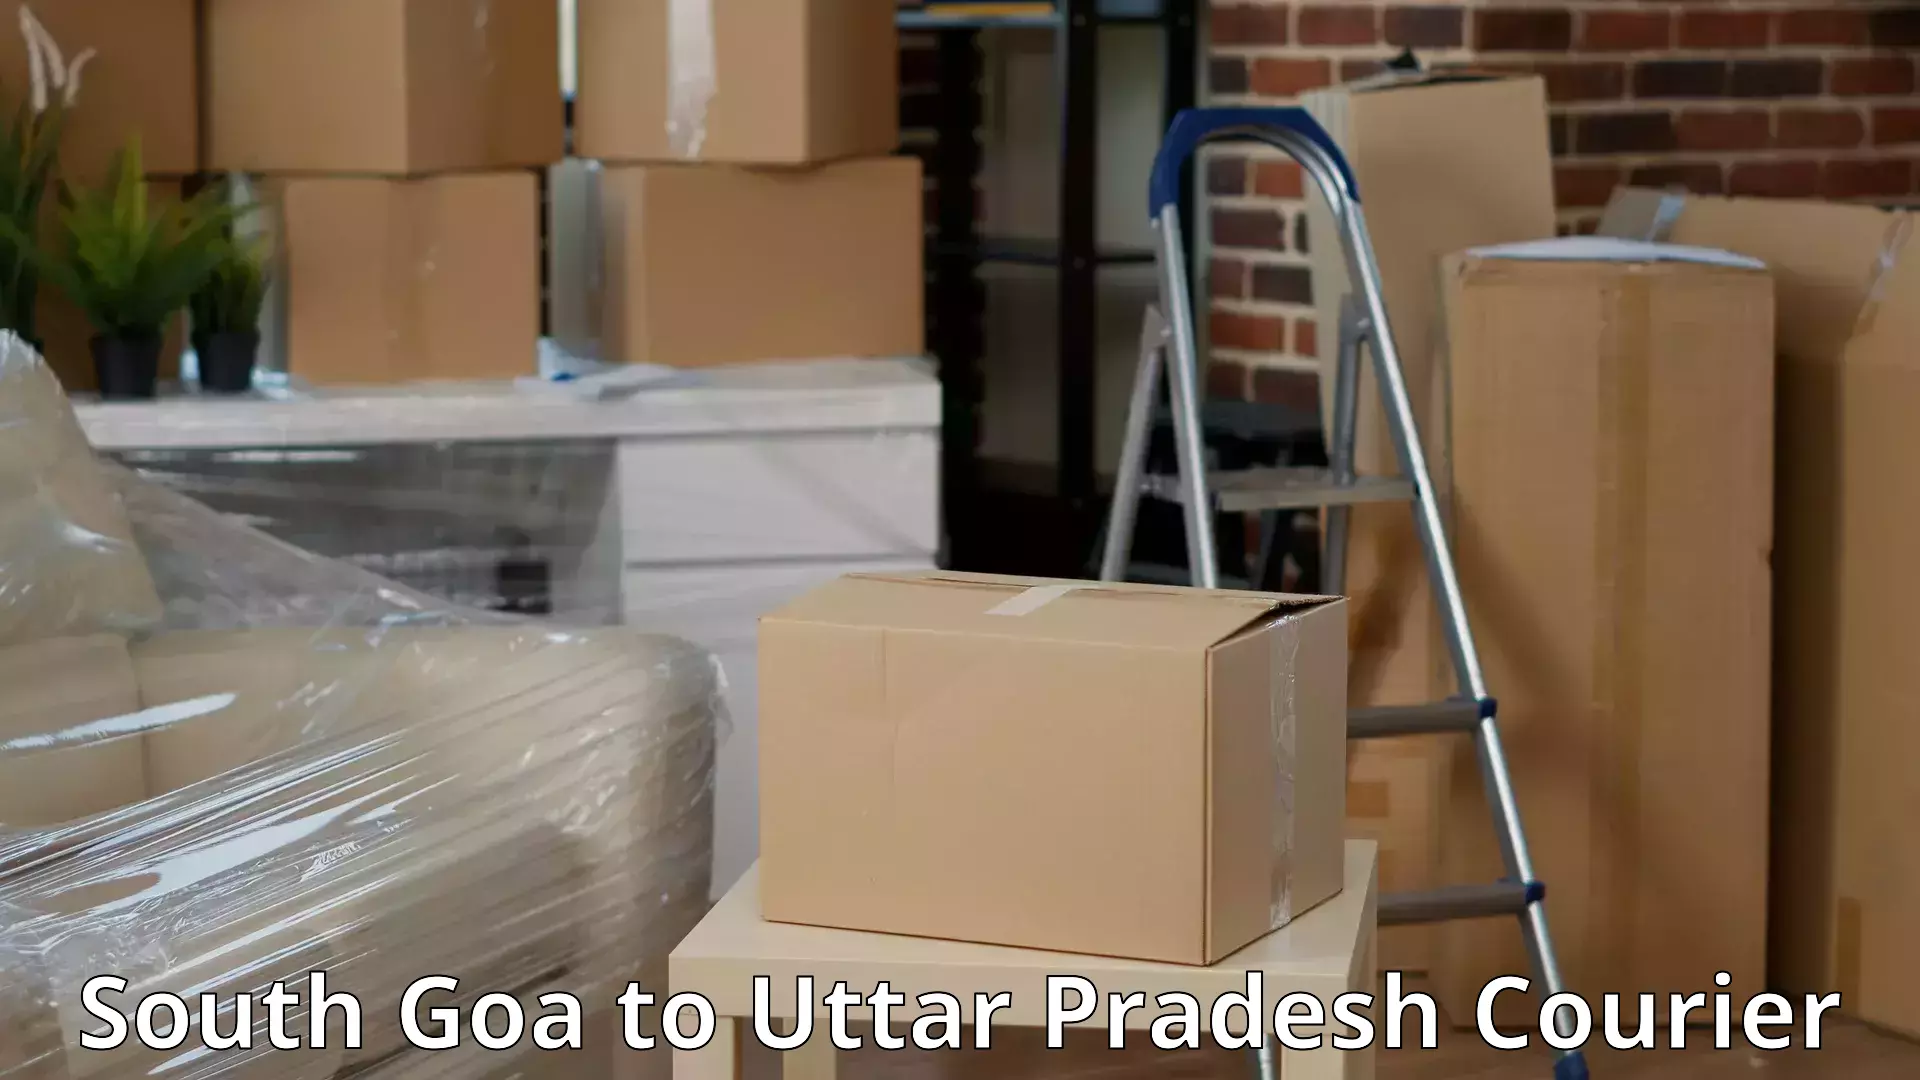 Furniture delivery service South Goa to Mathura